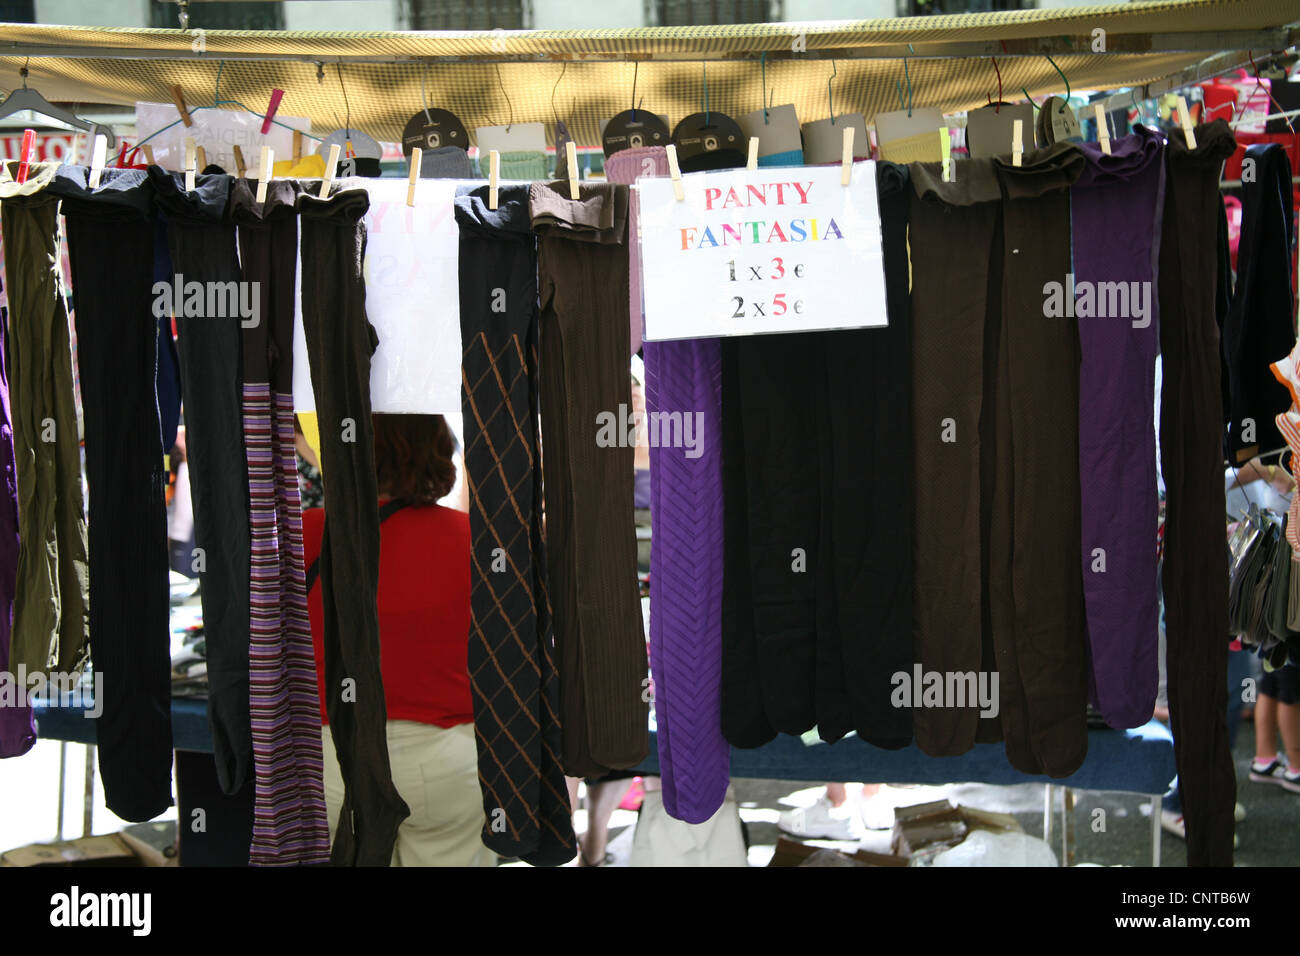 Plasencia, Spain - March 23, 2021: A Street Market Stall That Sells Women  Underwear As Tights, Pantyhose, Panties And Bras Stock Photo, Picture and  Royalty Free Image. Image 171879332.